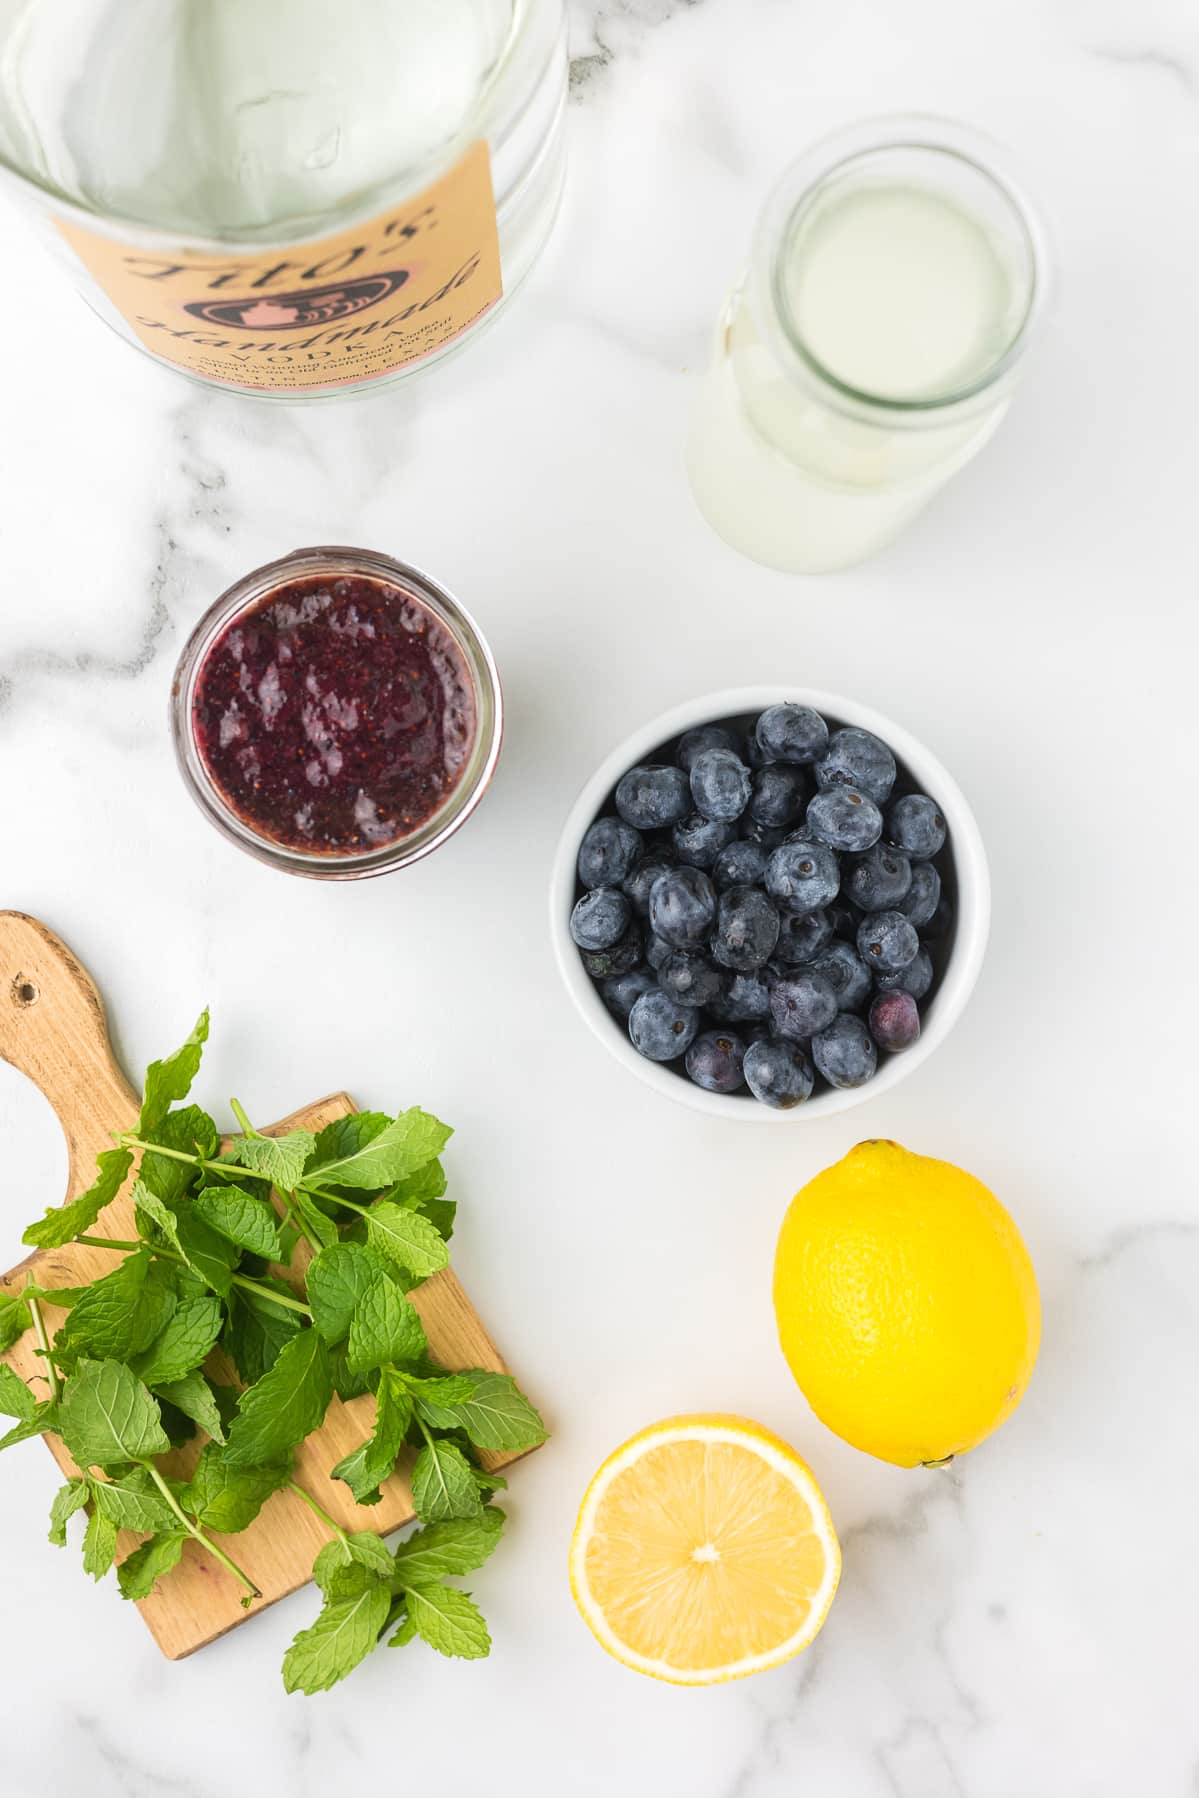 Ingredients to make a blueberry lemonade cocktail.